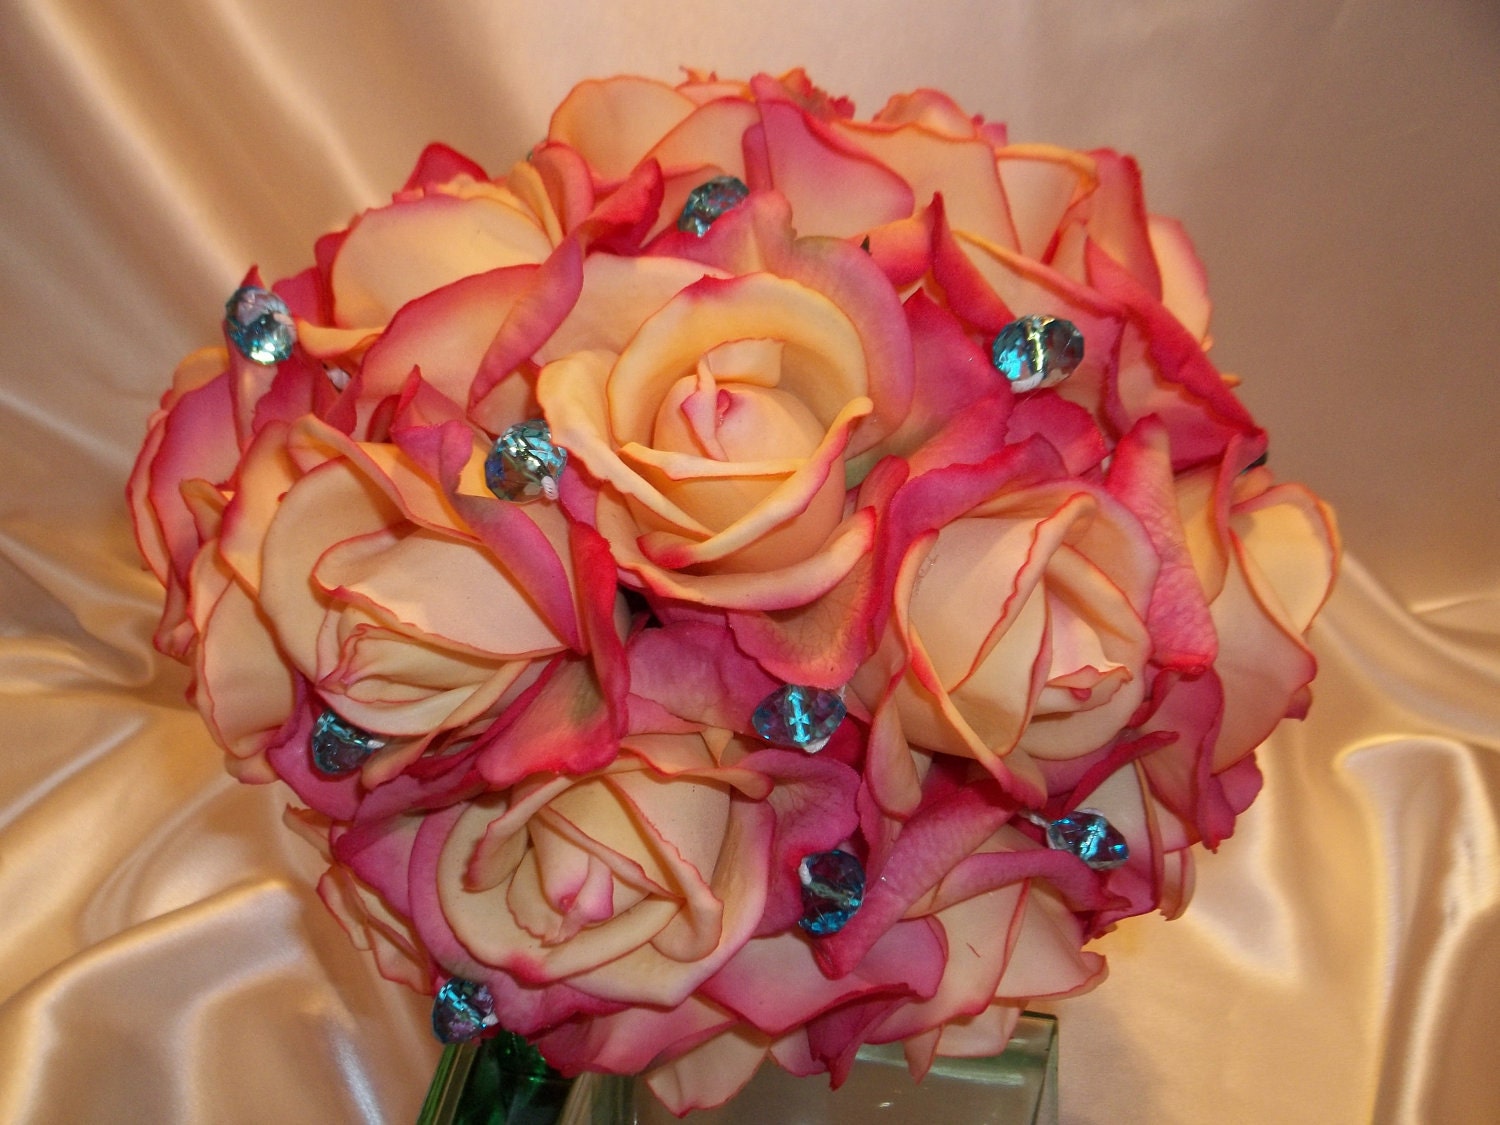 Shades of Coral Real Touch Roses Wedding Bouquet with Either Large or Smaller Teal Crystal Accents and Satin Hand Tied Stems.